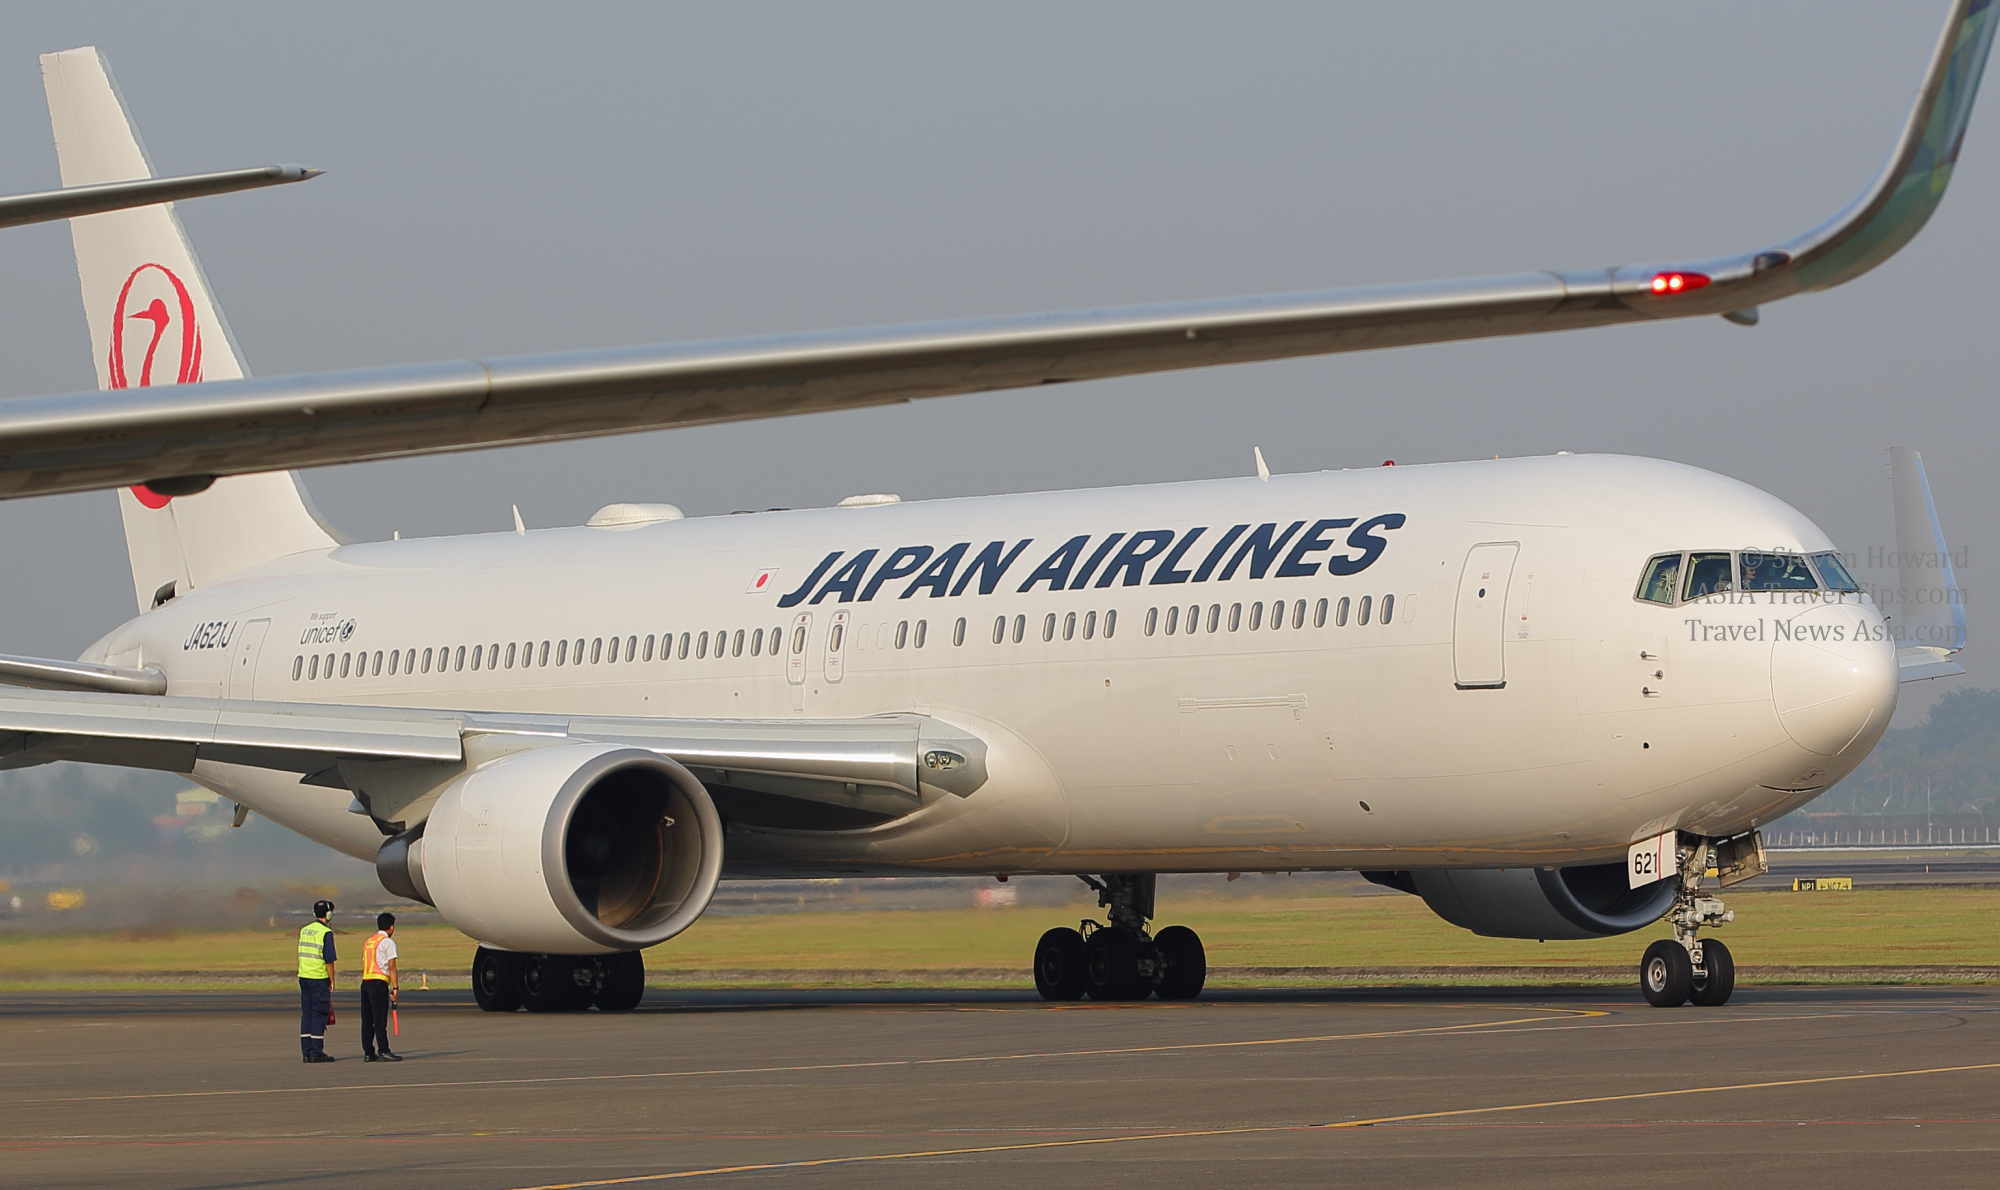 Japan Airlines Boeing 767 reg: JA621J. Picture by Steven Howard of TravelNewsAsia.com Click to enlarge.